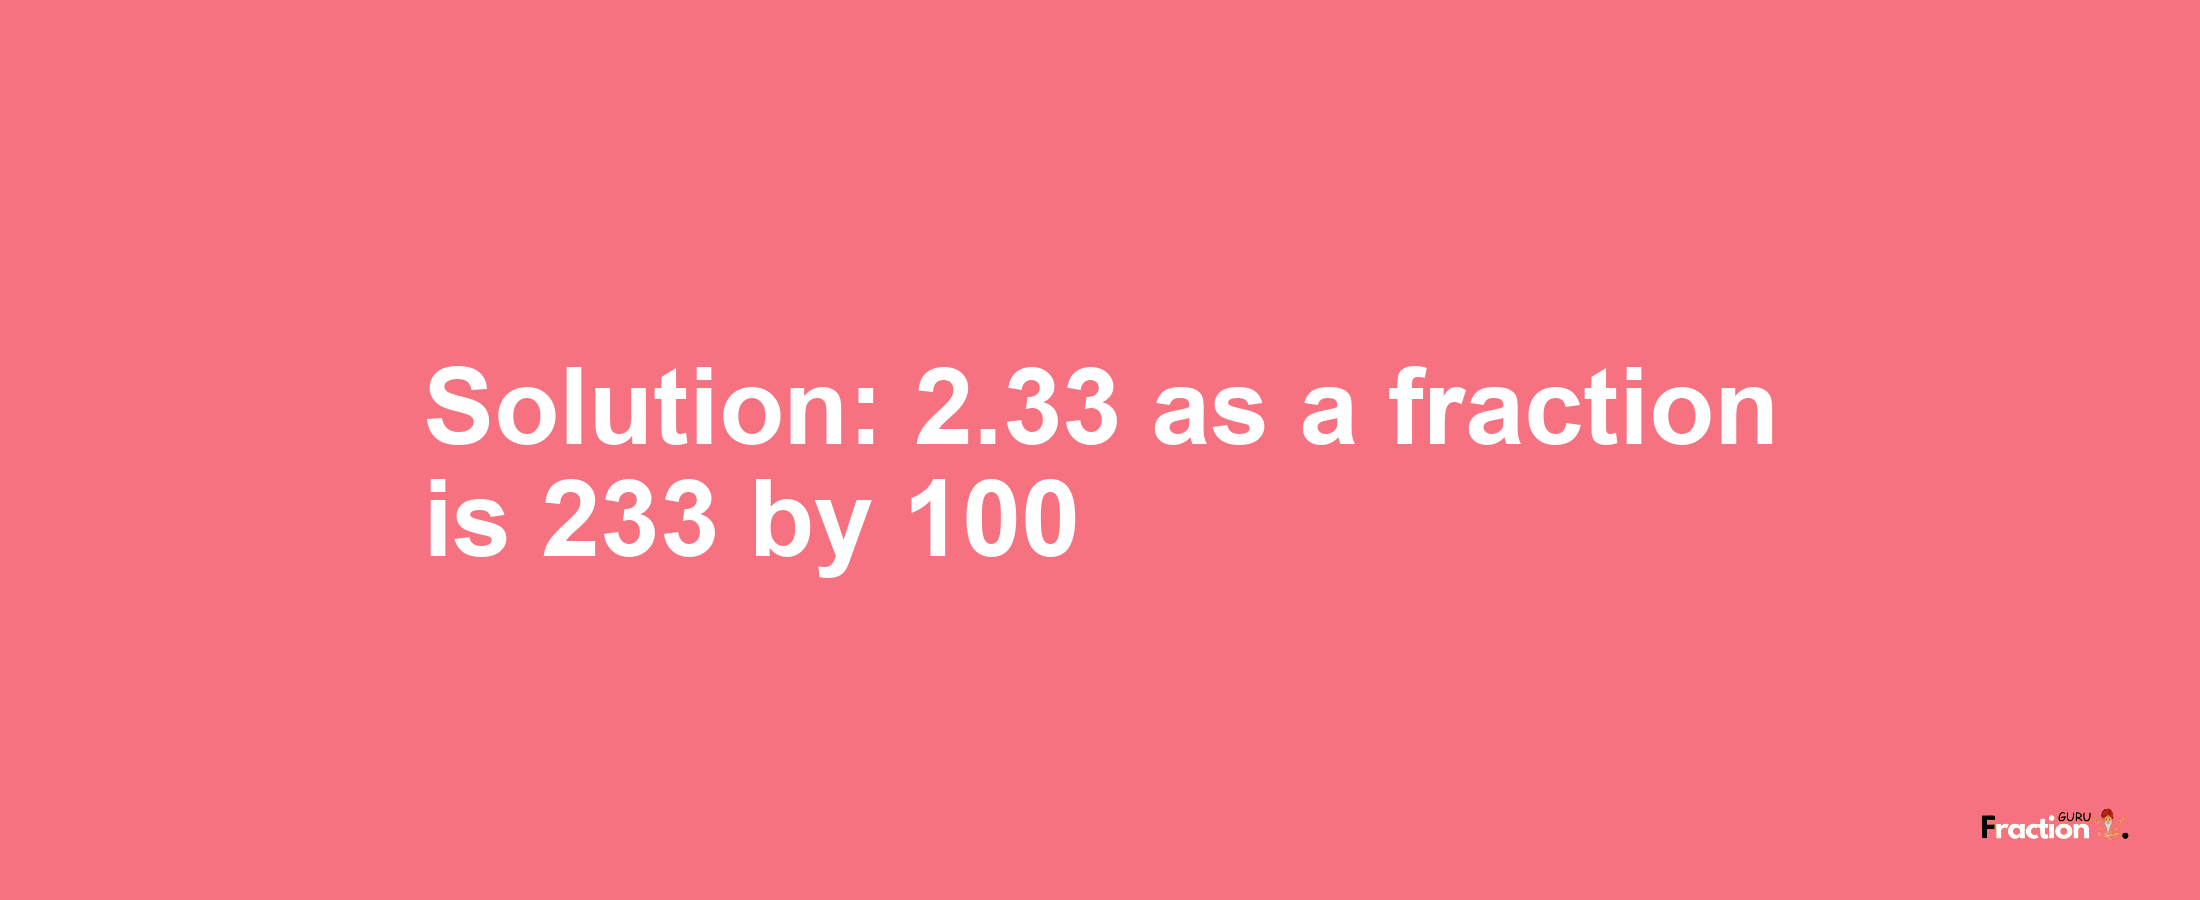 Solution:2.33 as a fraction is 233/100